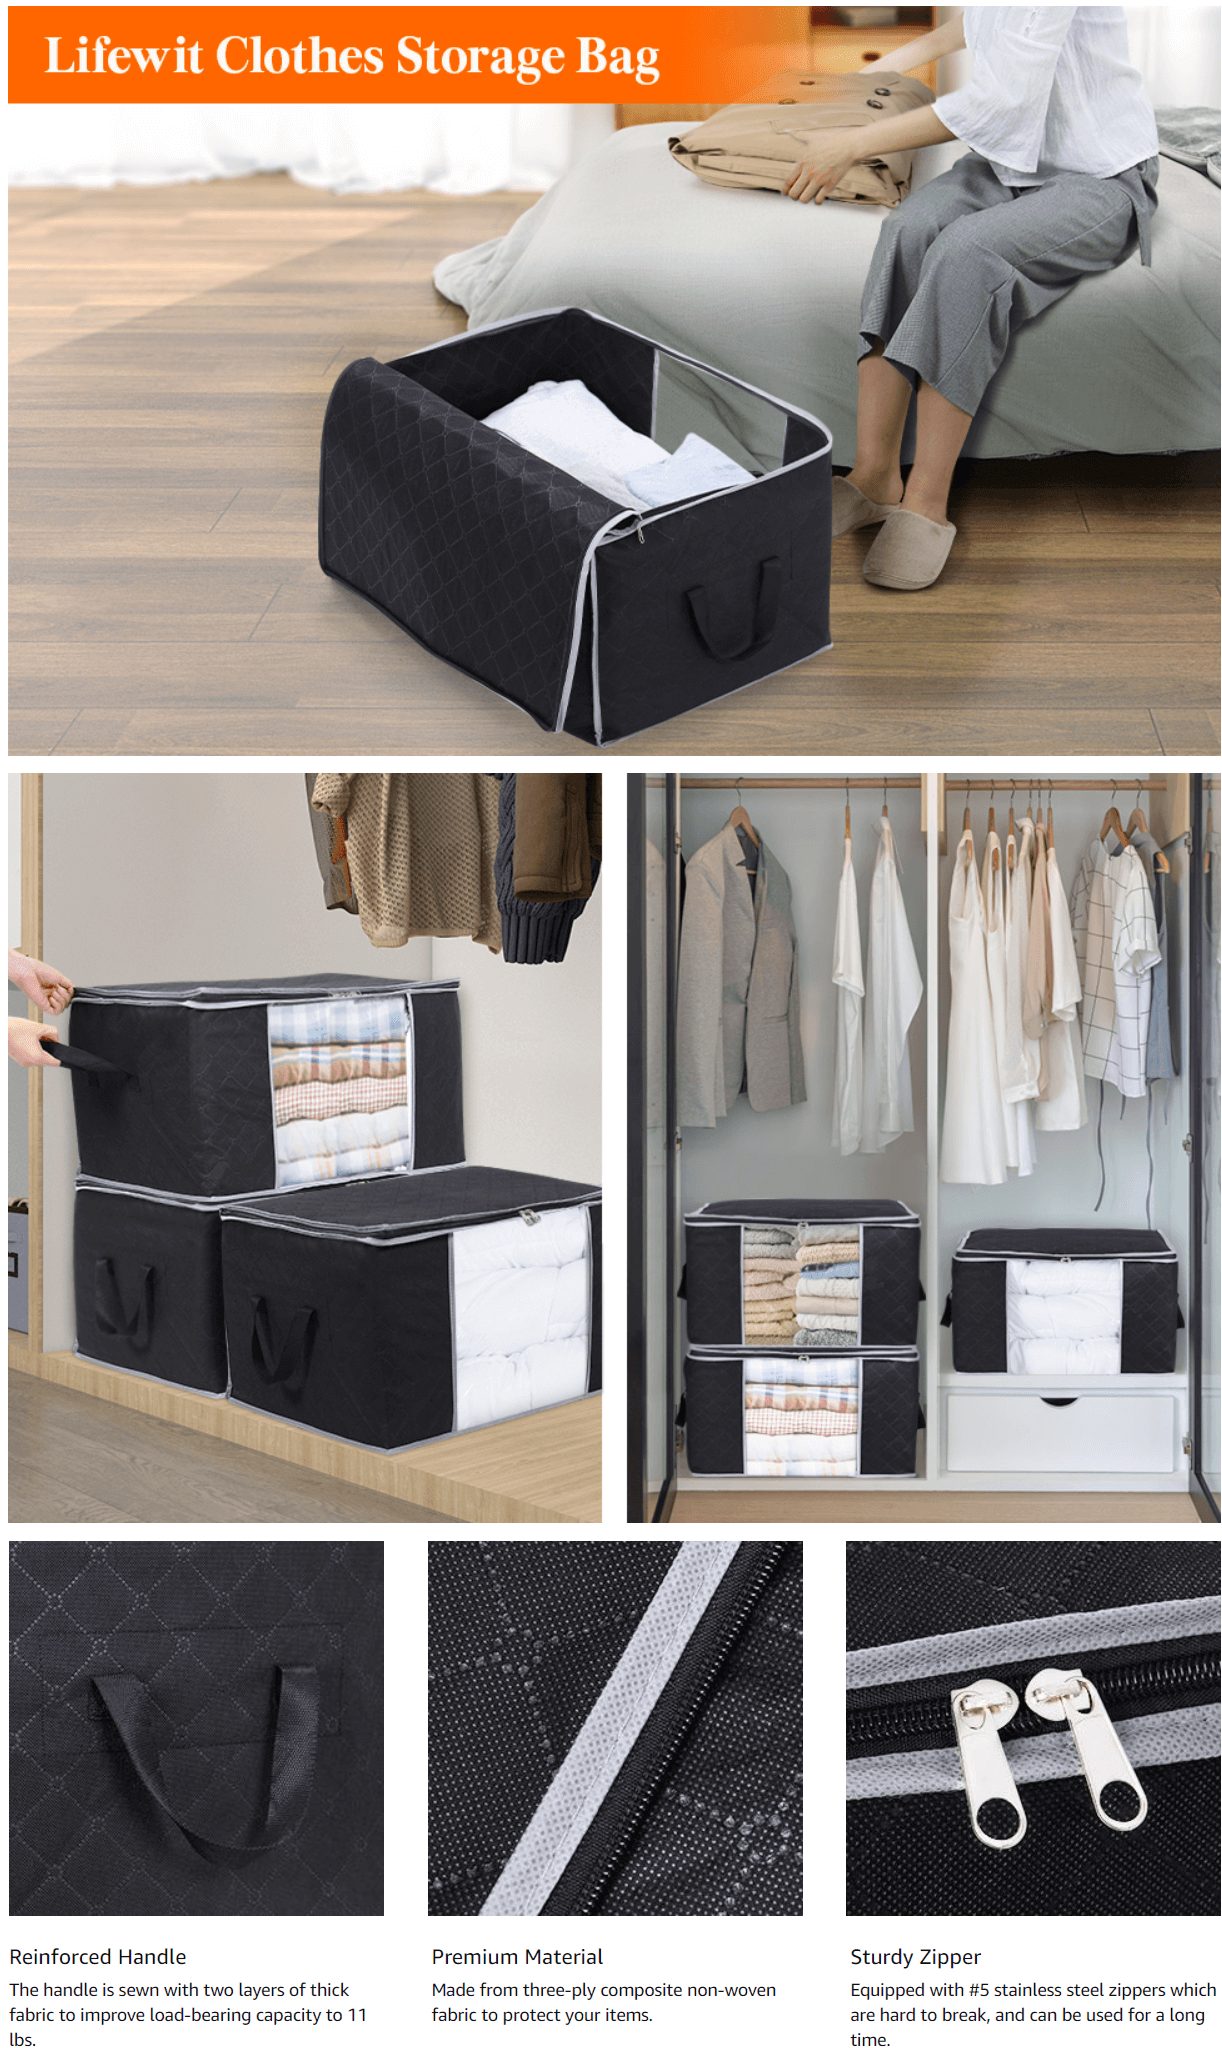 Lifewit 6-Pack Clothes Storage Bag, Storage Bins for Clothes, Blankets,  Comforters, 60L, Black 